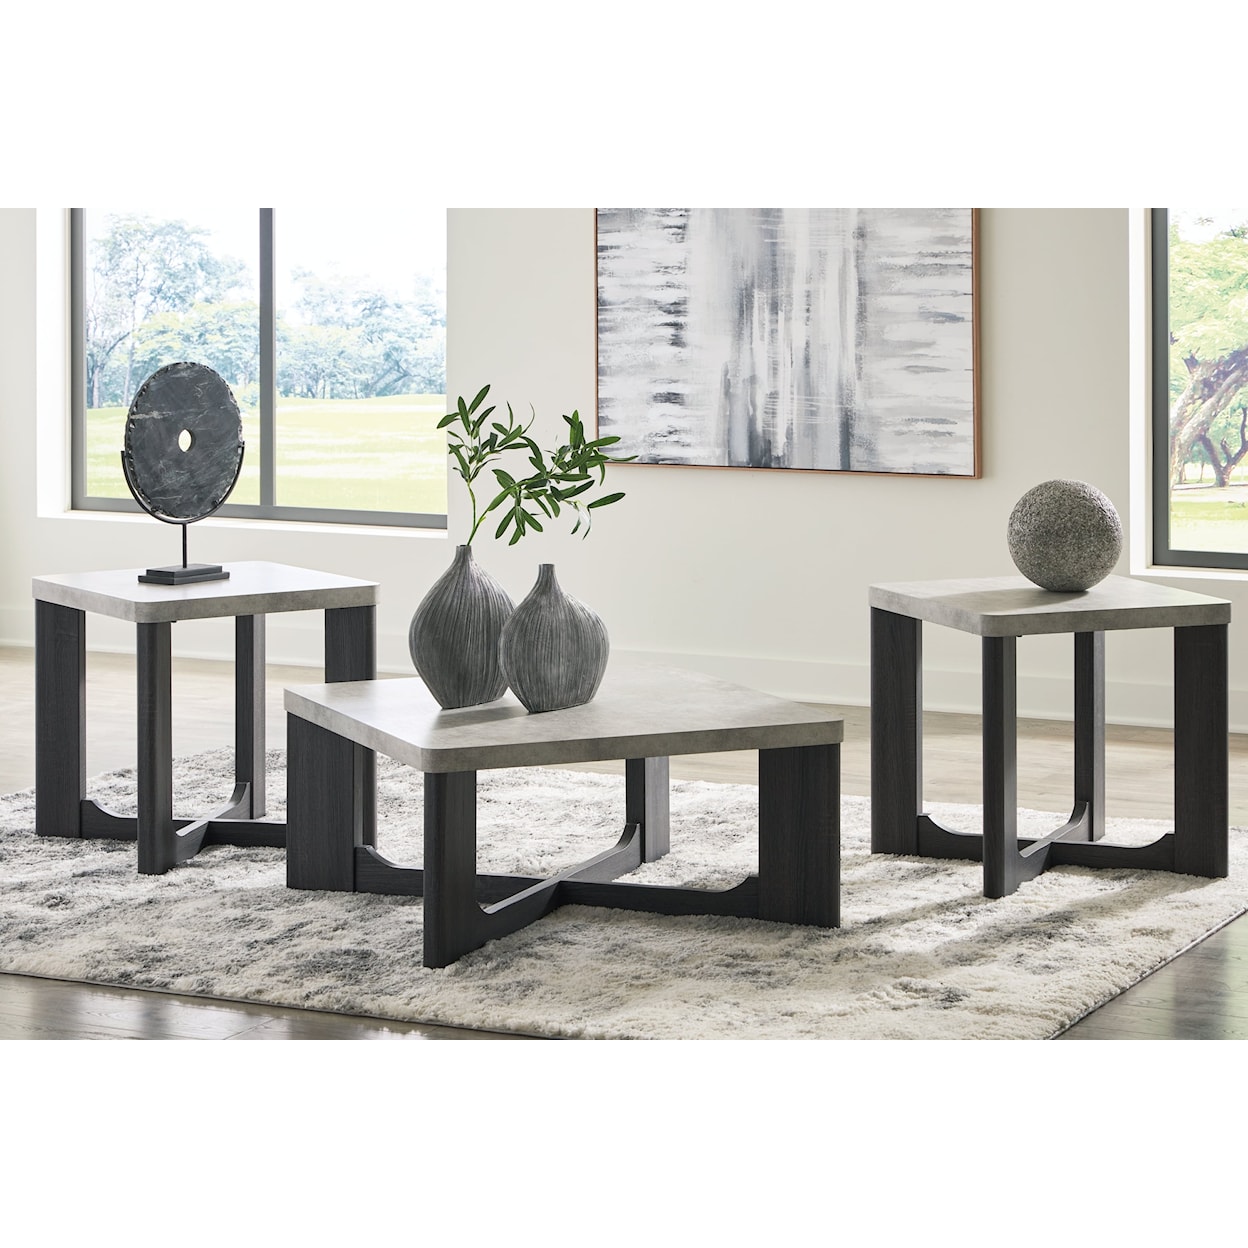 Benchcraft Sharstorm Occasional Table Set